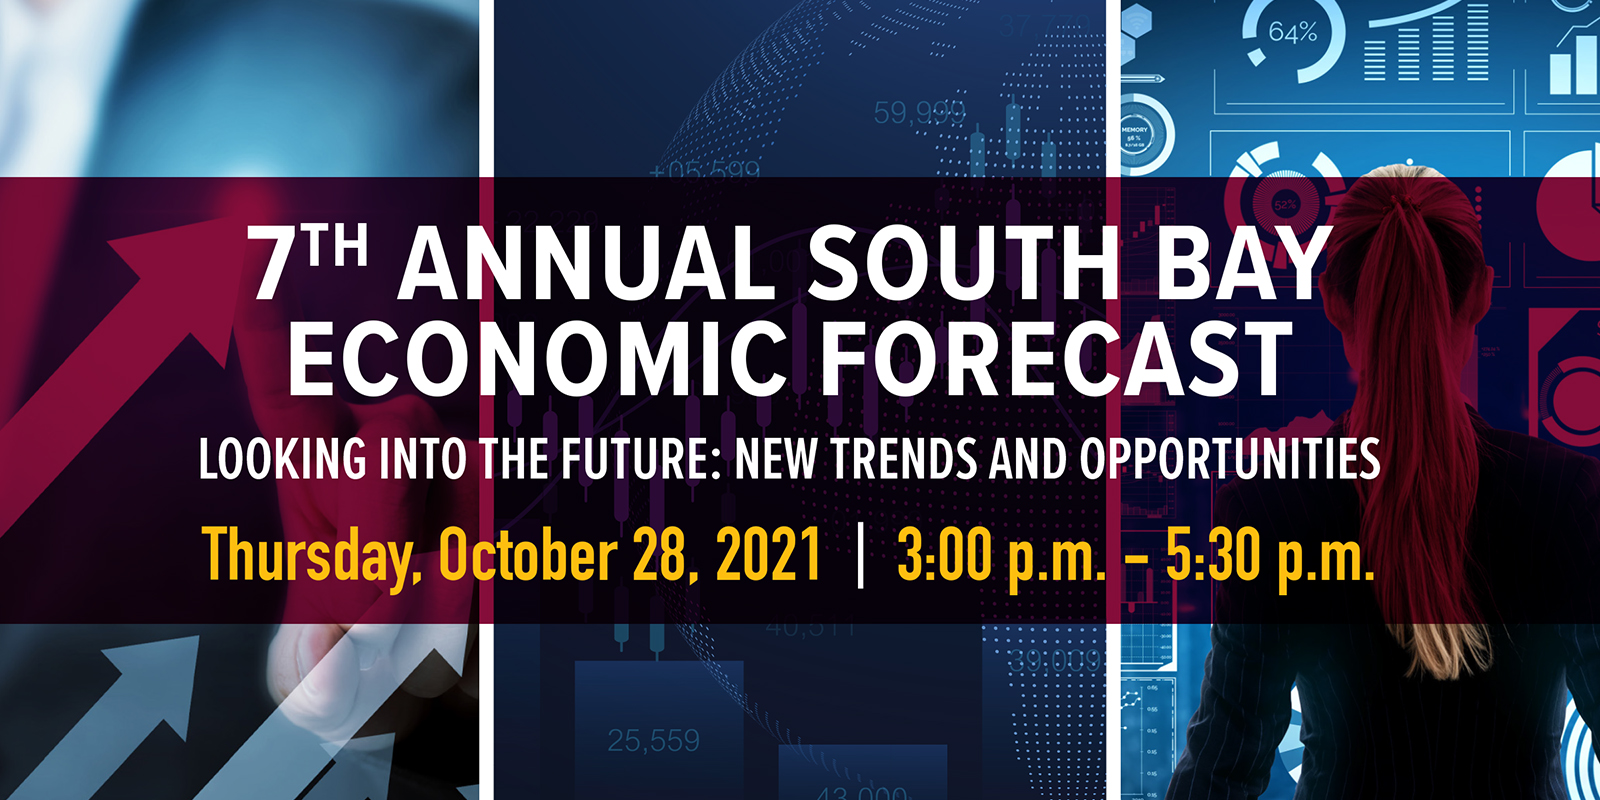 7th Annual Economic Forecast Looking Into the Future: New Trends and Opportunities, October 28, 2021 3 - 5:30pm